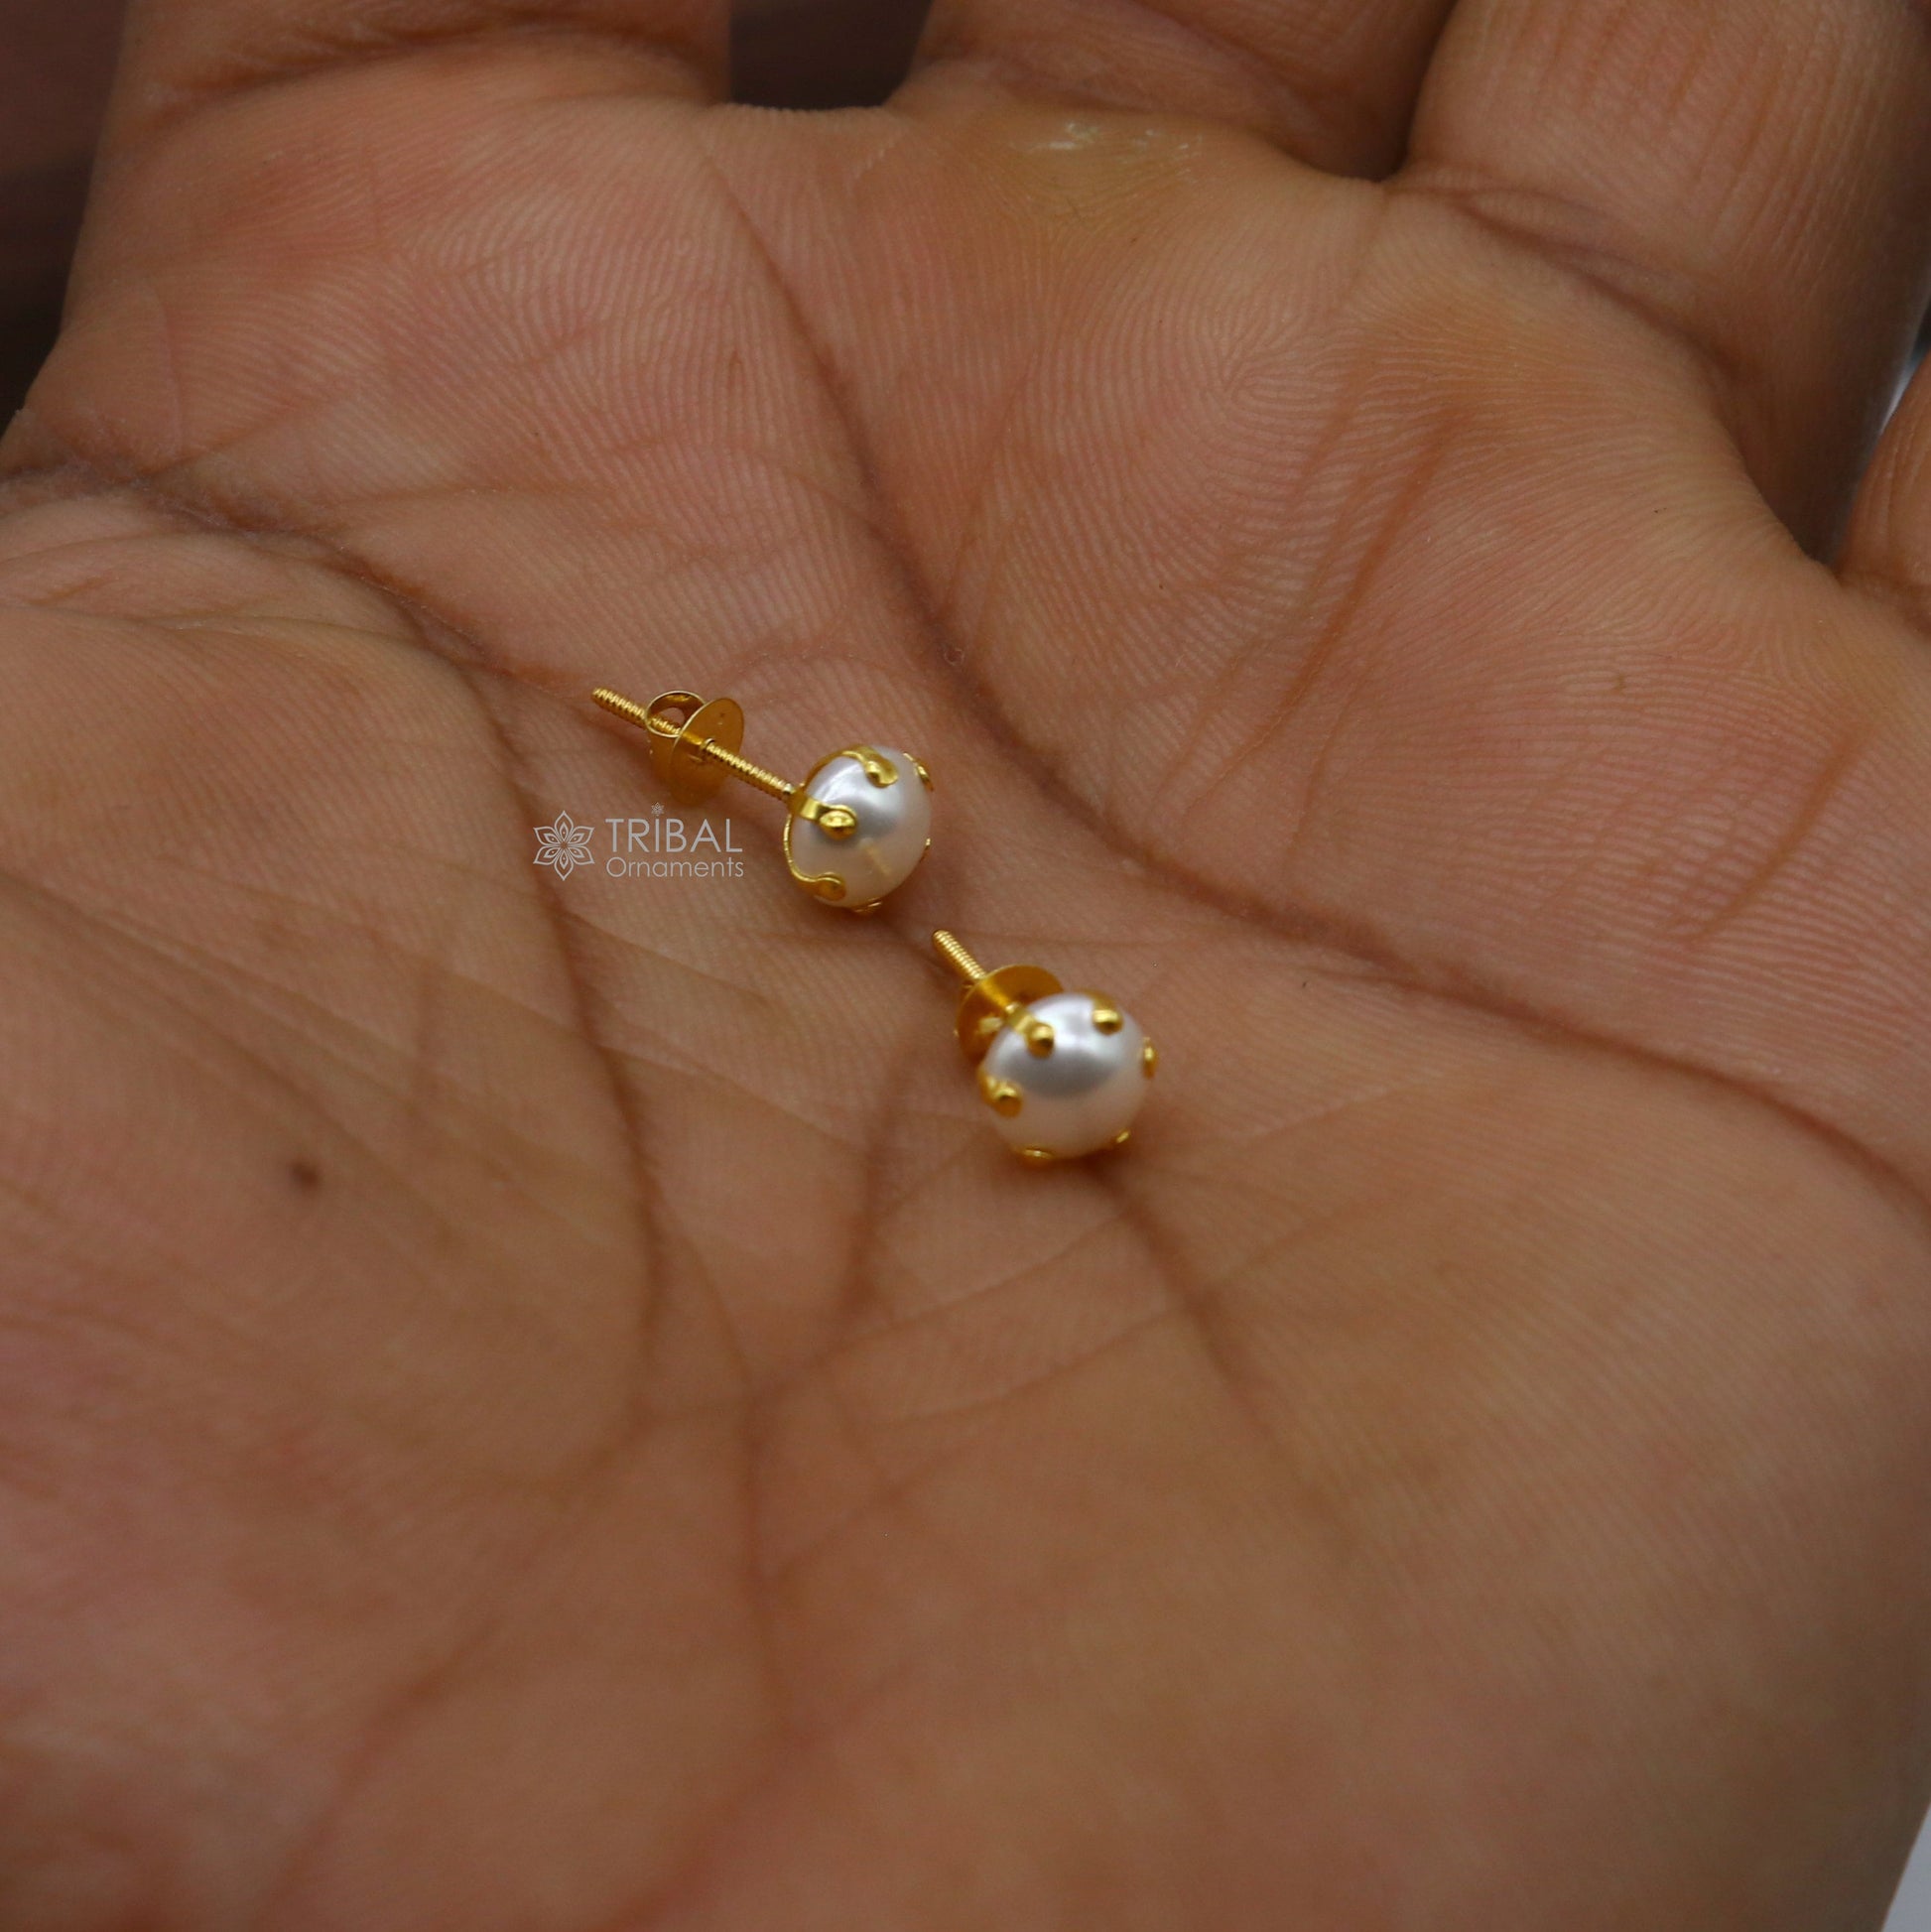 Exclusive round pearl 14kt yellow gold fabulous stud earring for unisex jewelry from india er182 - TRIBAL ORNAMENTS